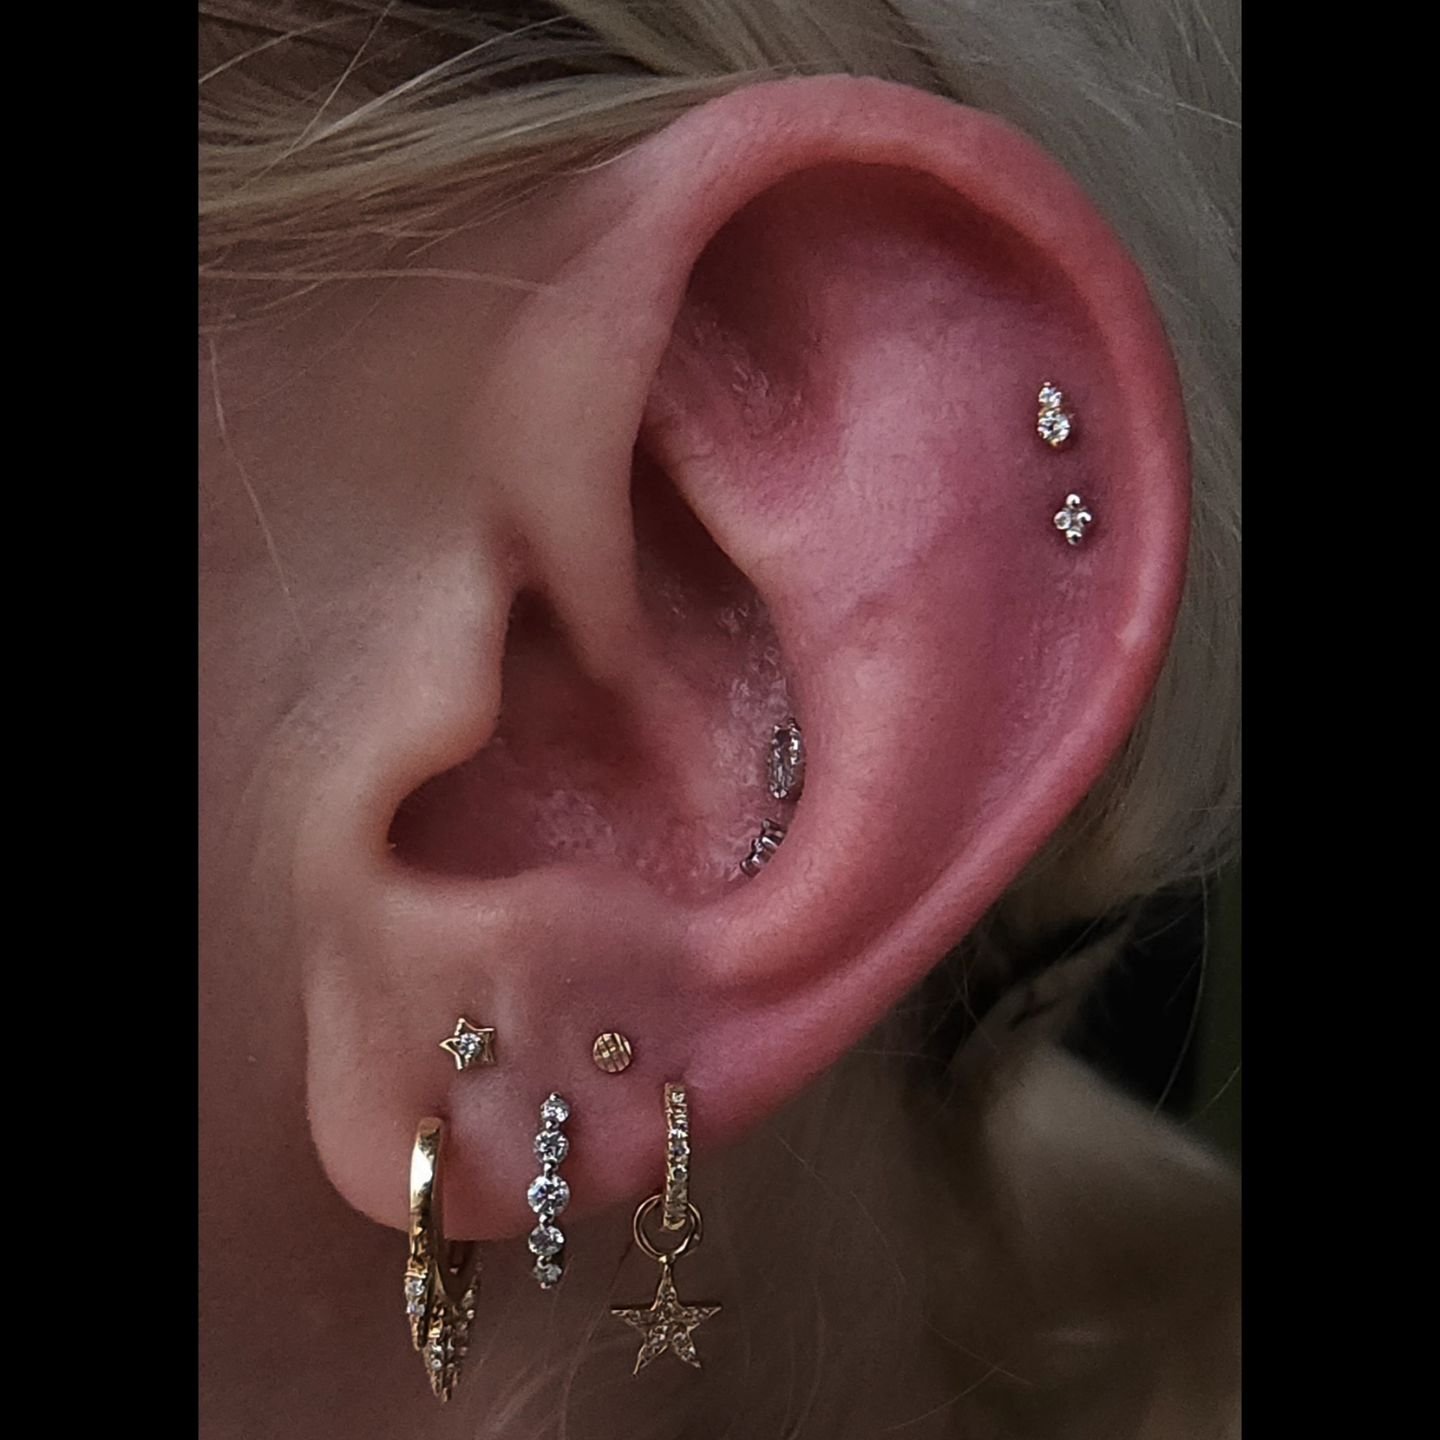 Tonight we have the pleasure of showing you the work we've done with Andy! They have great taste and are always a joy to work with. ✨ 

I this session Vanessa added an adorable stacked lobe piercing to complement the other one done by @piercerjeff du